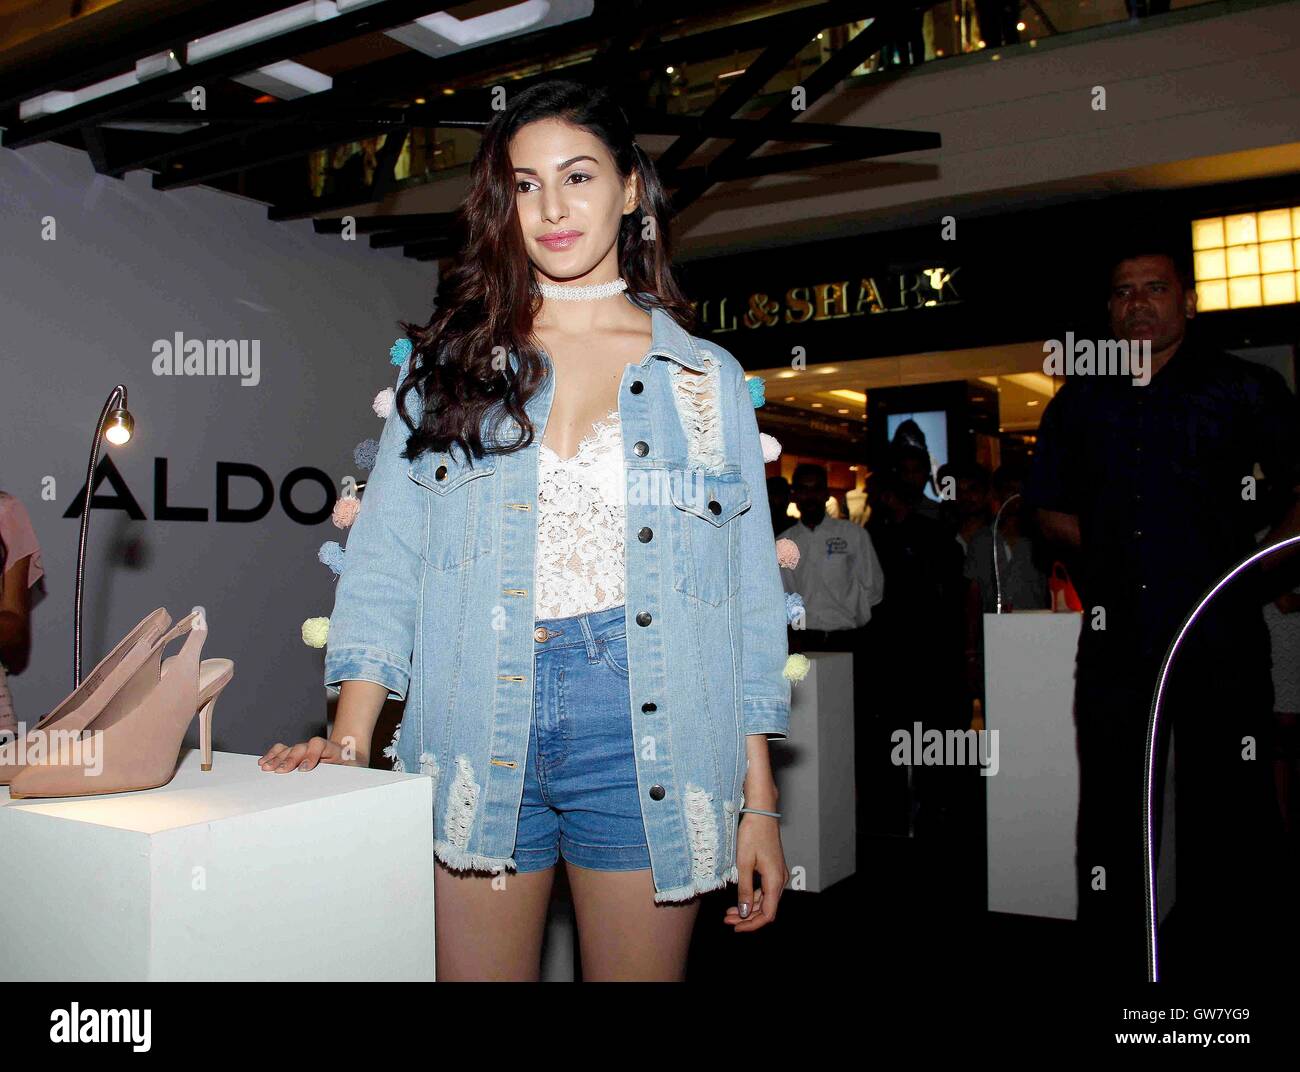 Bollywood actor Amyra Dastur during the of Aldo's ArtandSoles Fall'16 collection, in Mumbai, India September 2, 2016 Stock Photo -